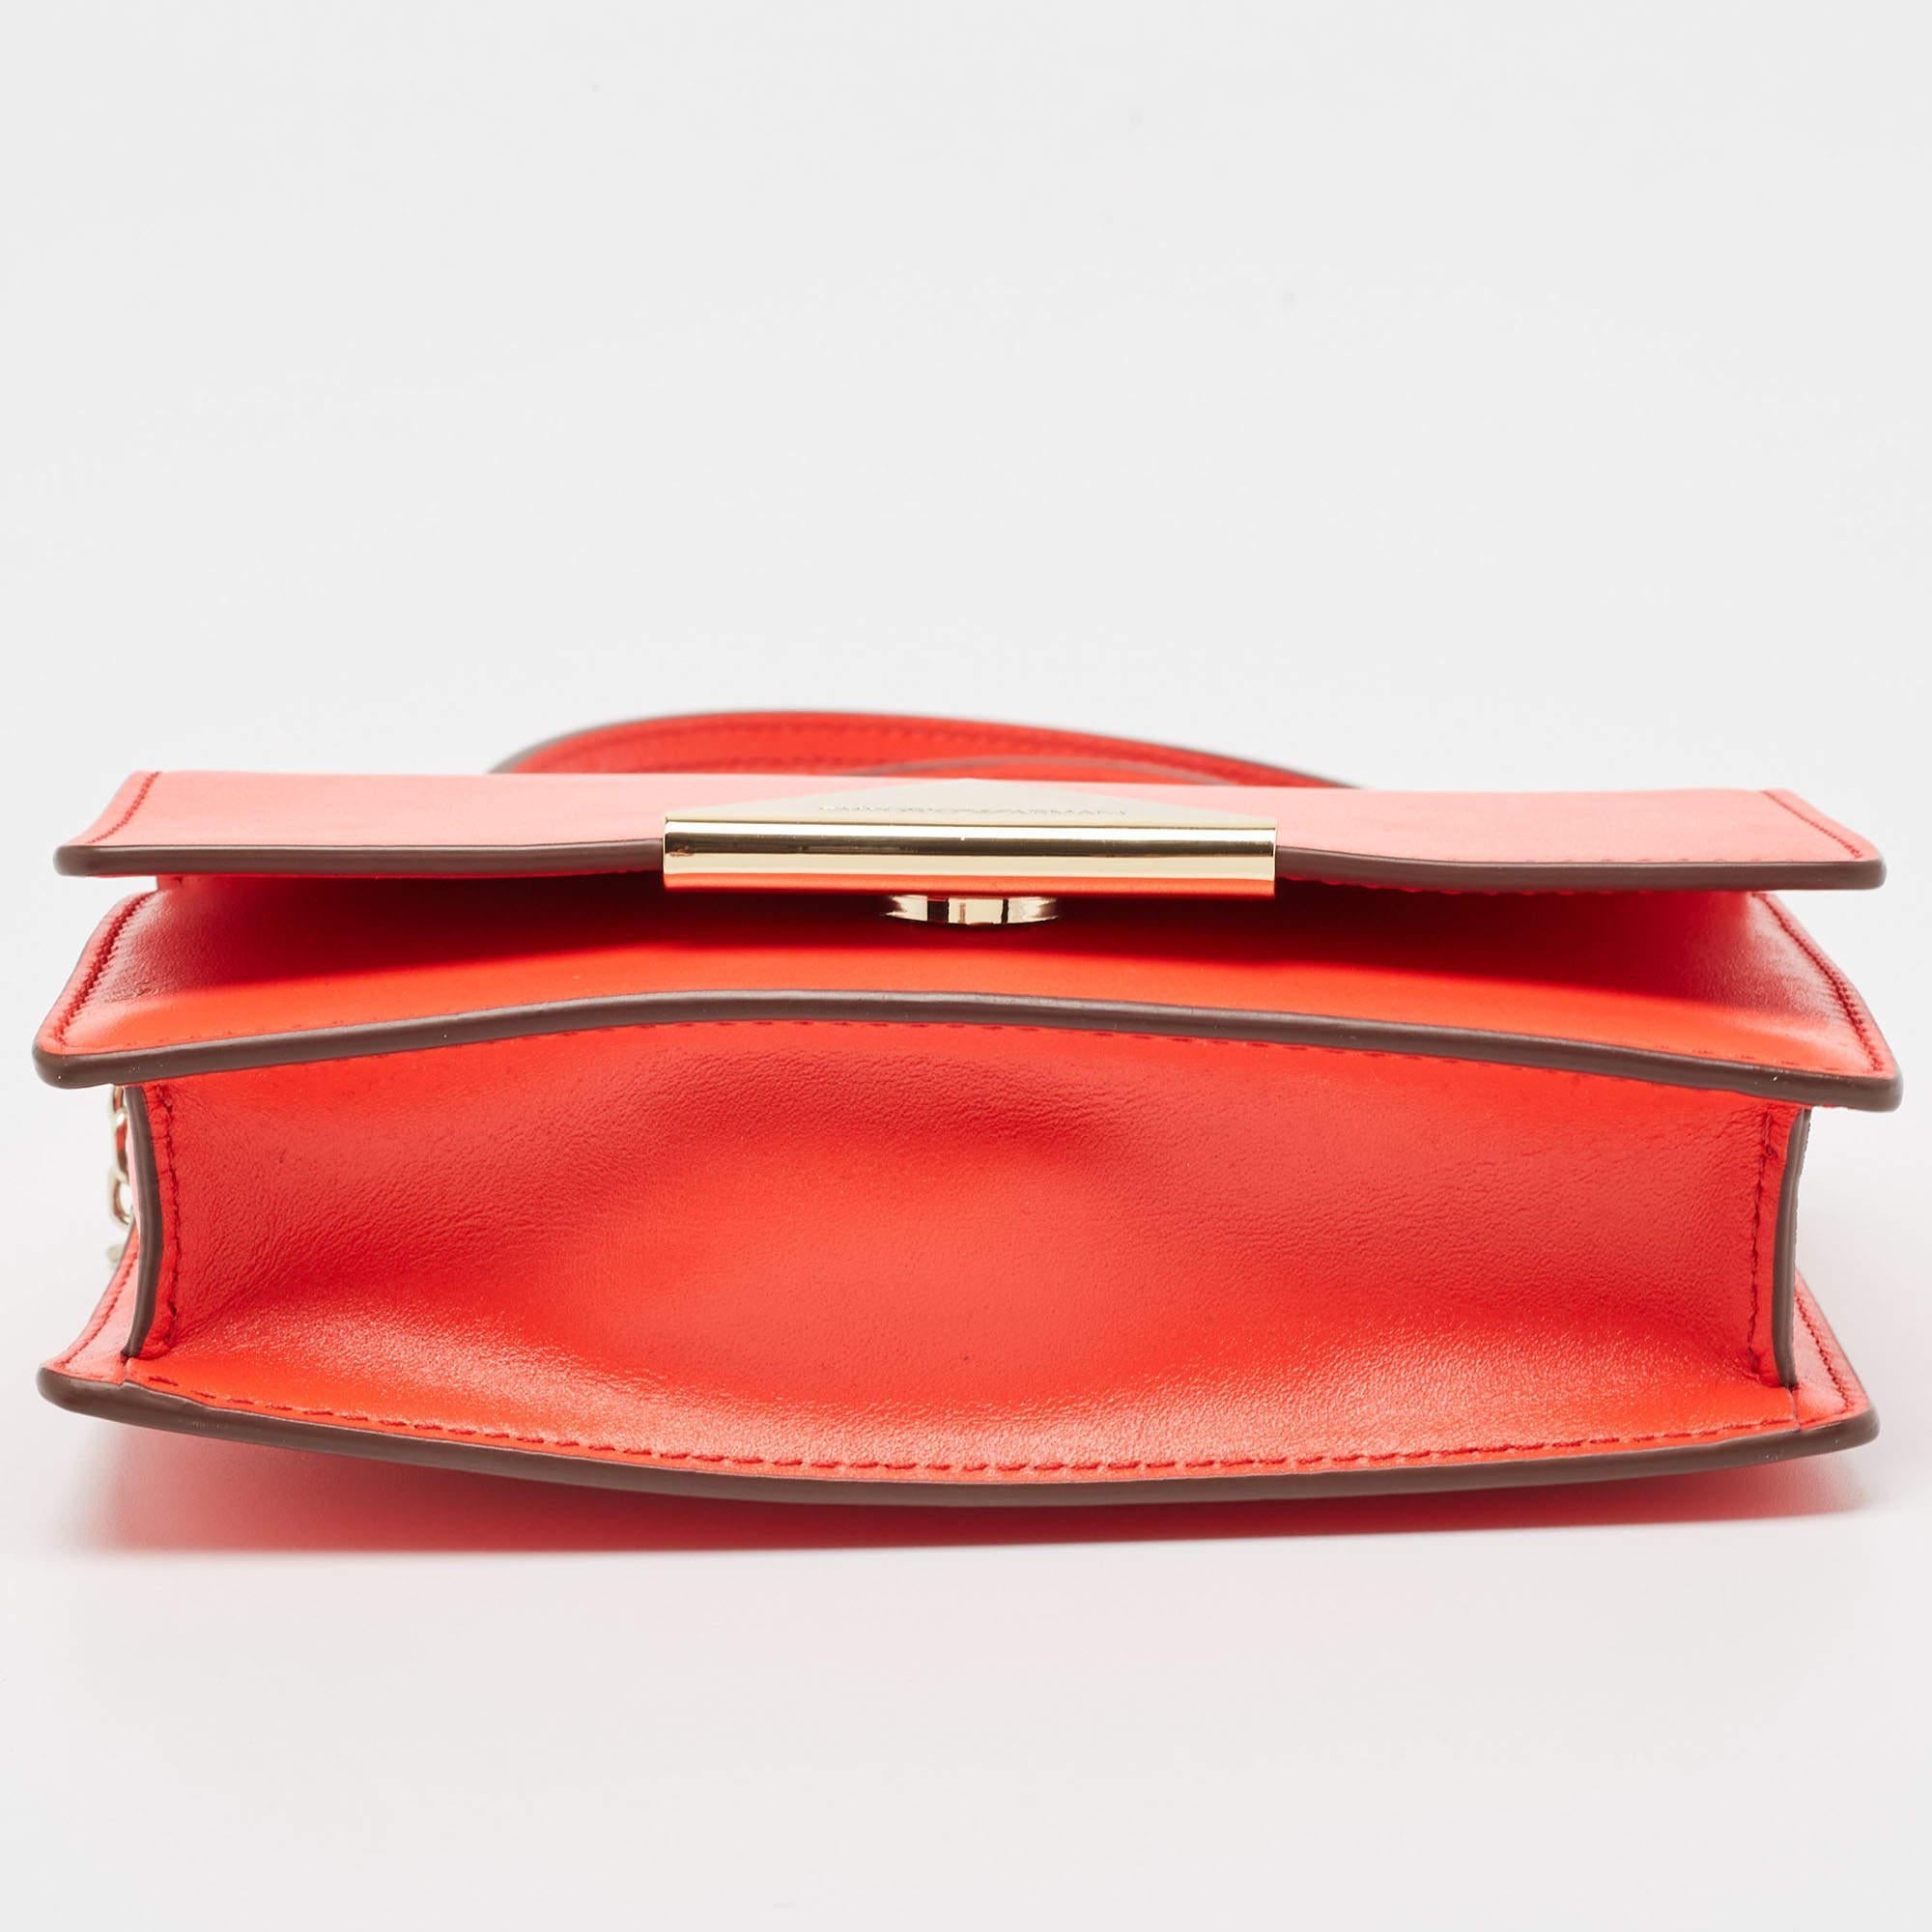 Emporio Armani Neon Red Leather Flap Crossbody Bag For Sale 6